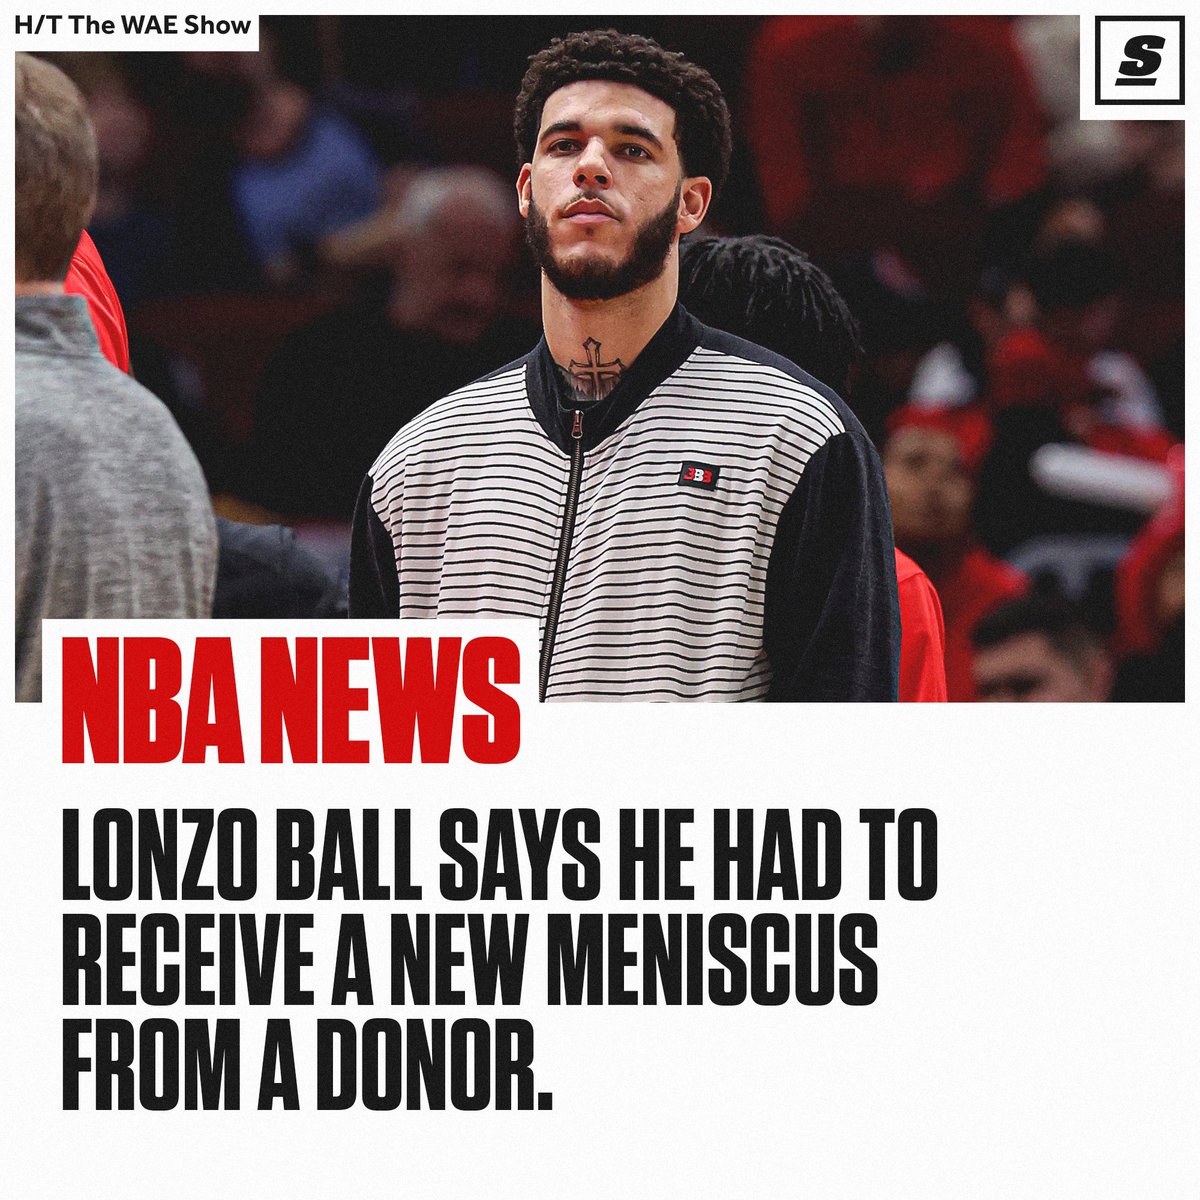 Lonzo Ball speaks on his knee injury and says he tore his Mencius so many times, he needed to receive a new one from a donor. 😯